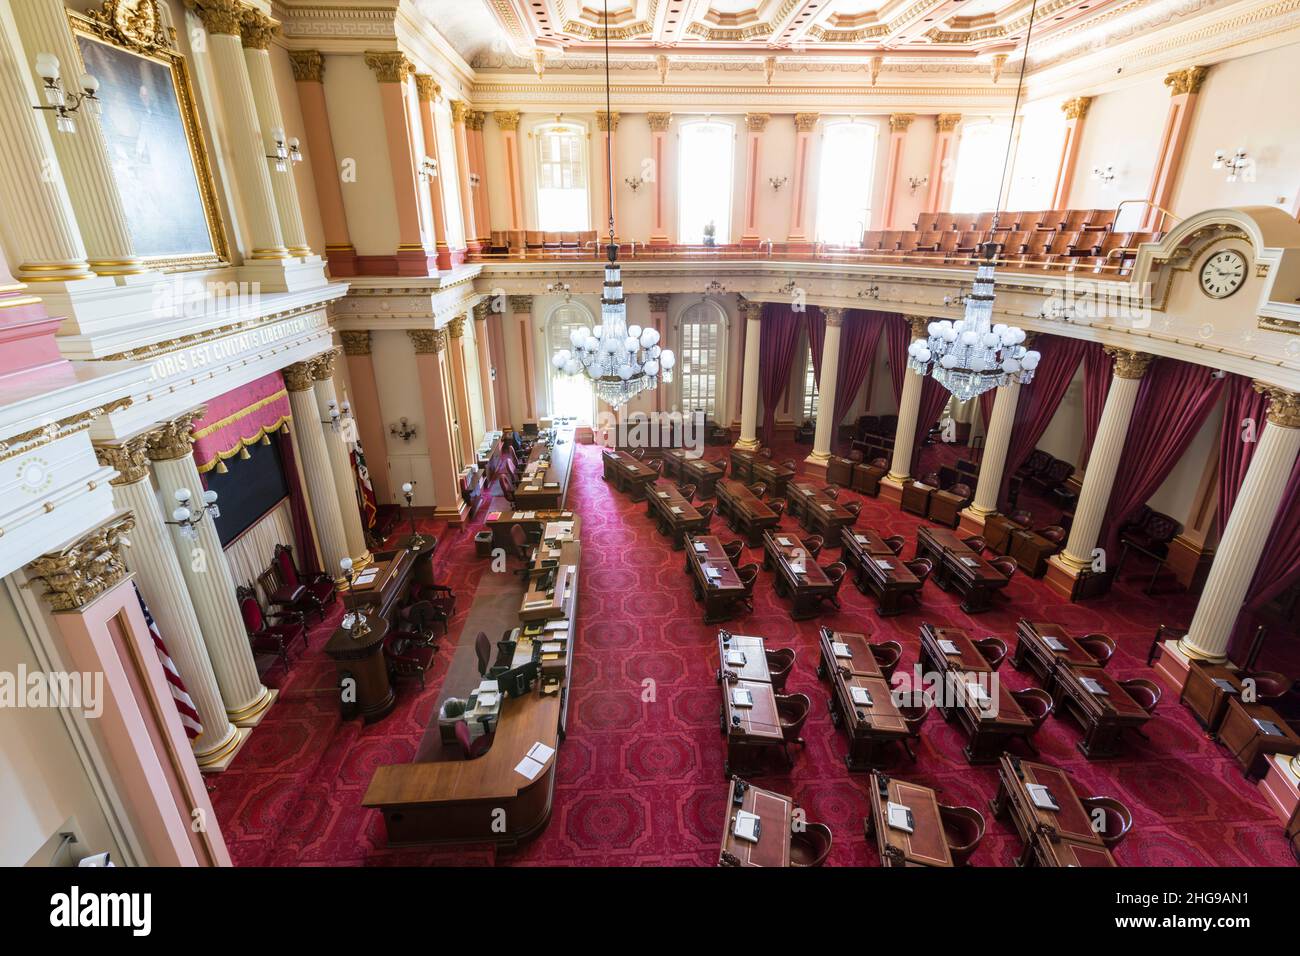 SACRAMENTO, CALIFORNIA - July 4, 2014:  California State assembly meeting room in the historic capitol building. Stock Photo